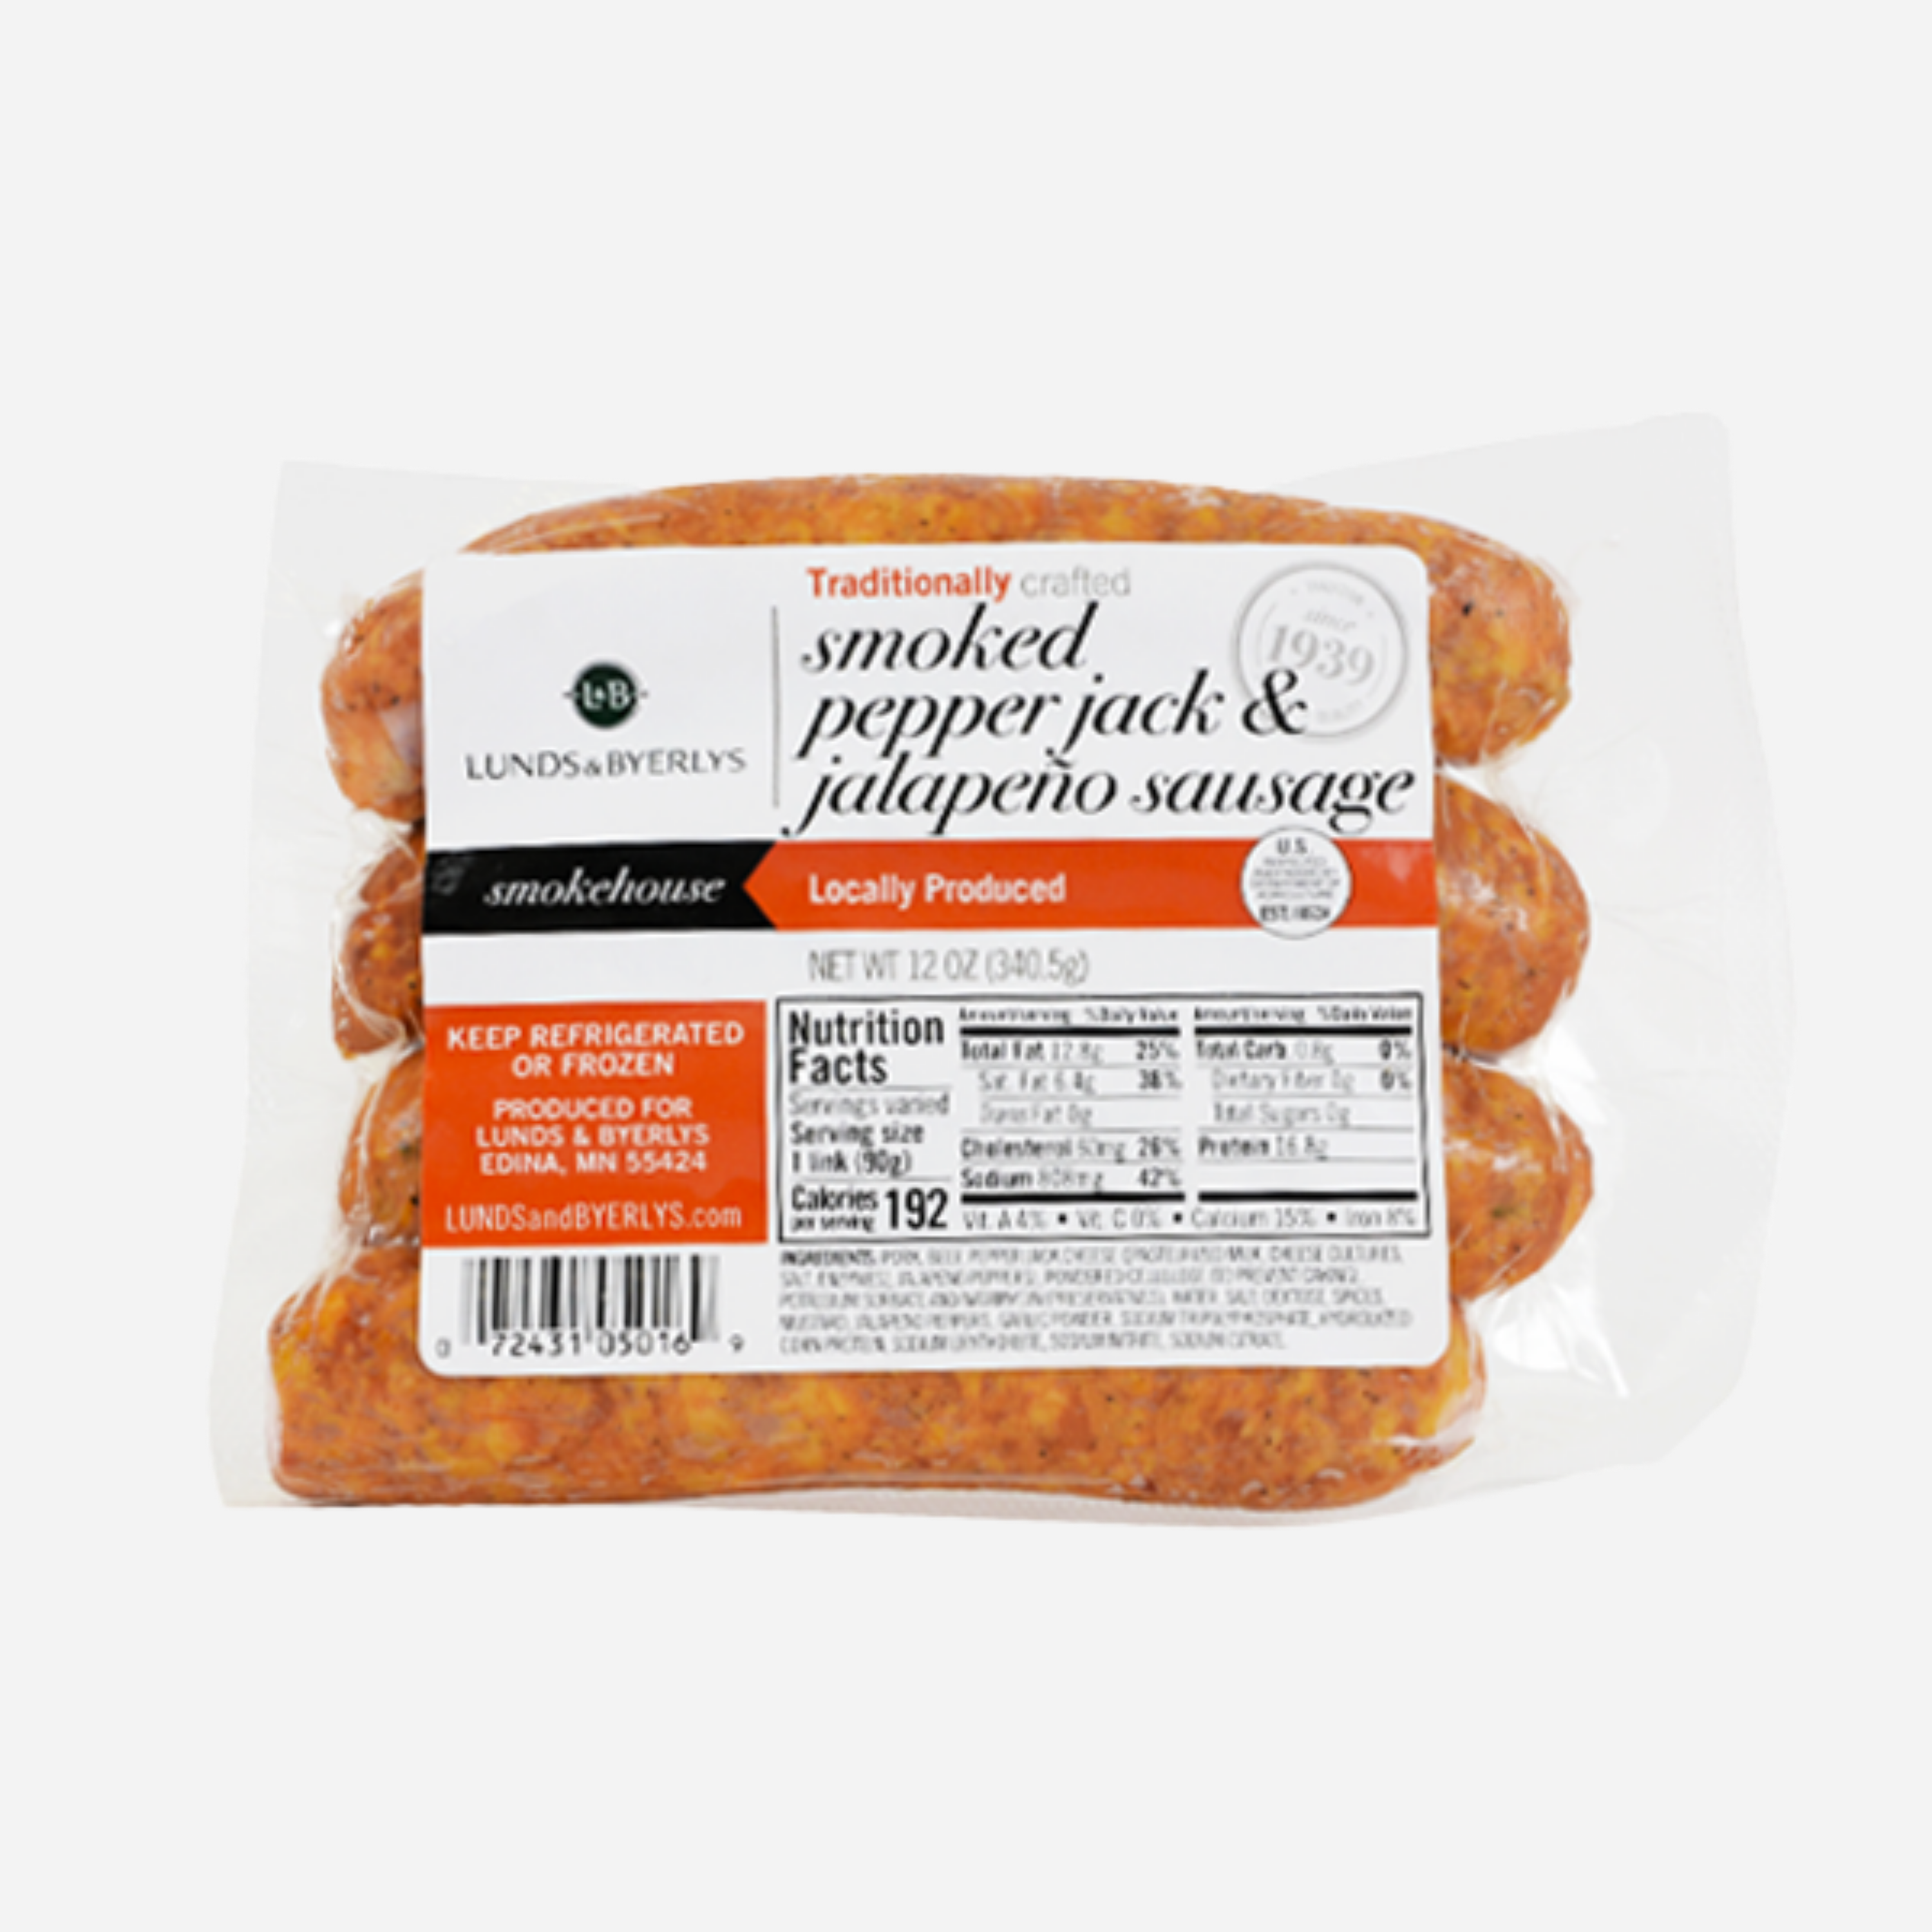 Pick 6 L&B Sausage and Brats SIX 12 oz packages